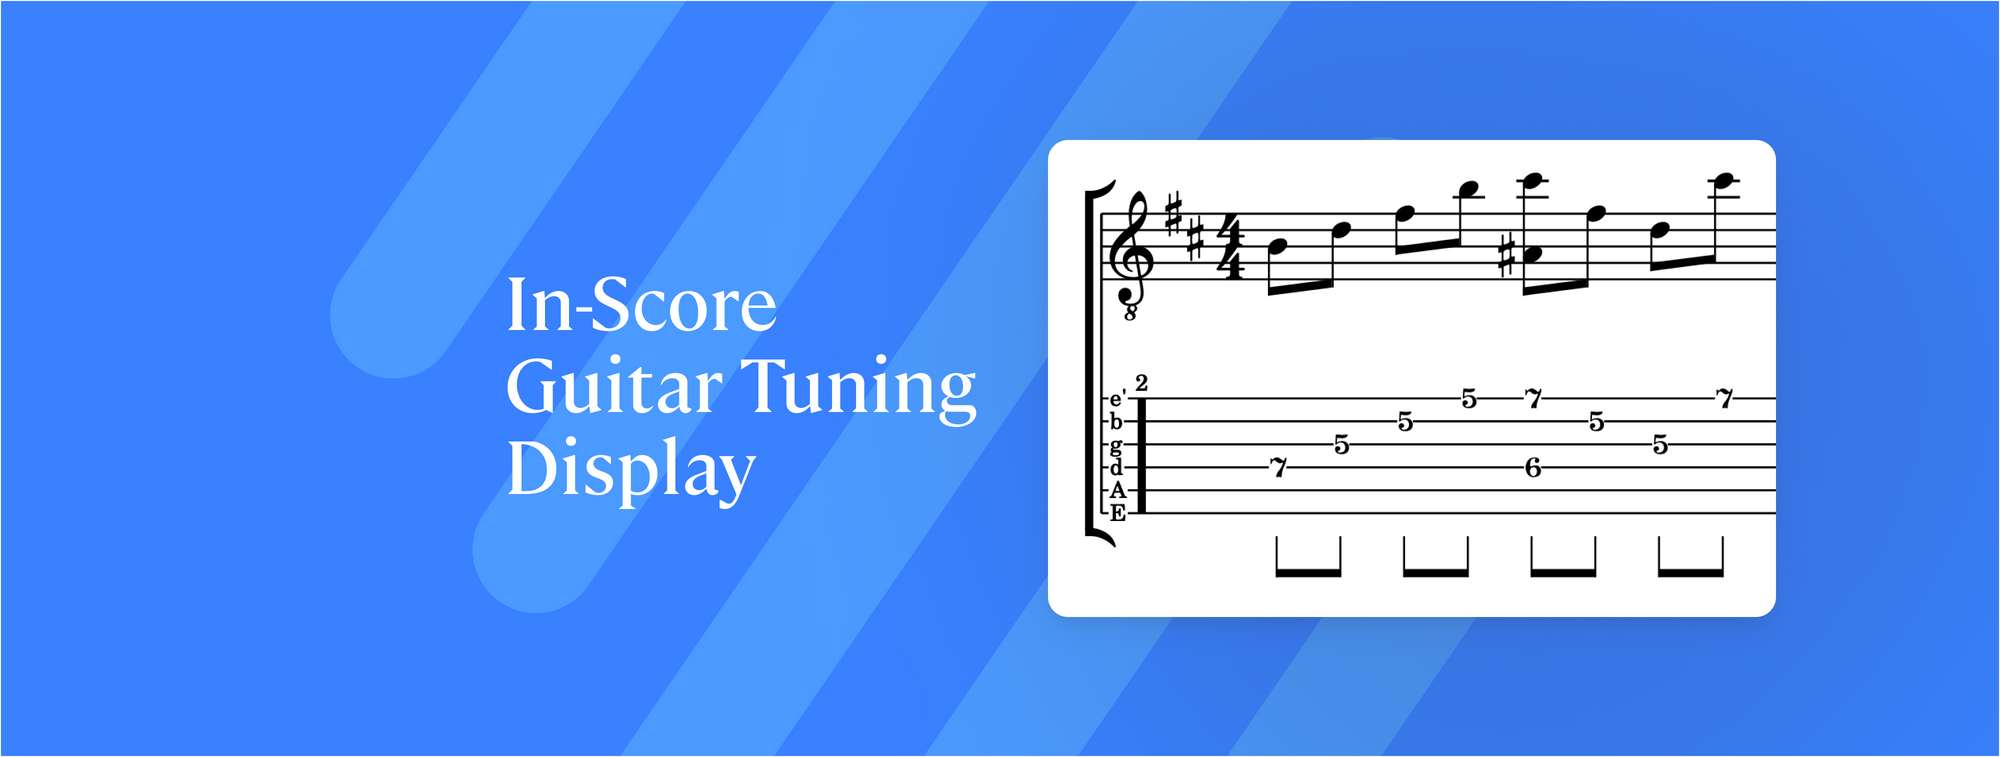 Efficiency Refined: Flat's Improved In-Score Guitar Tuning Display